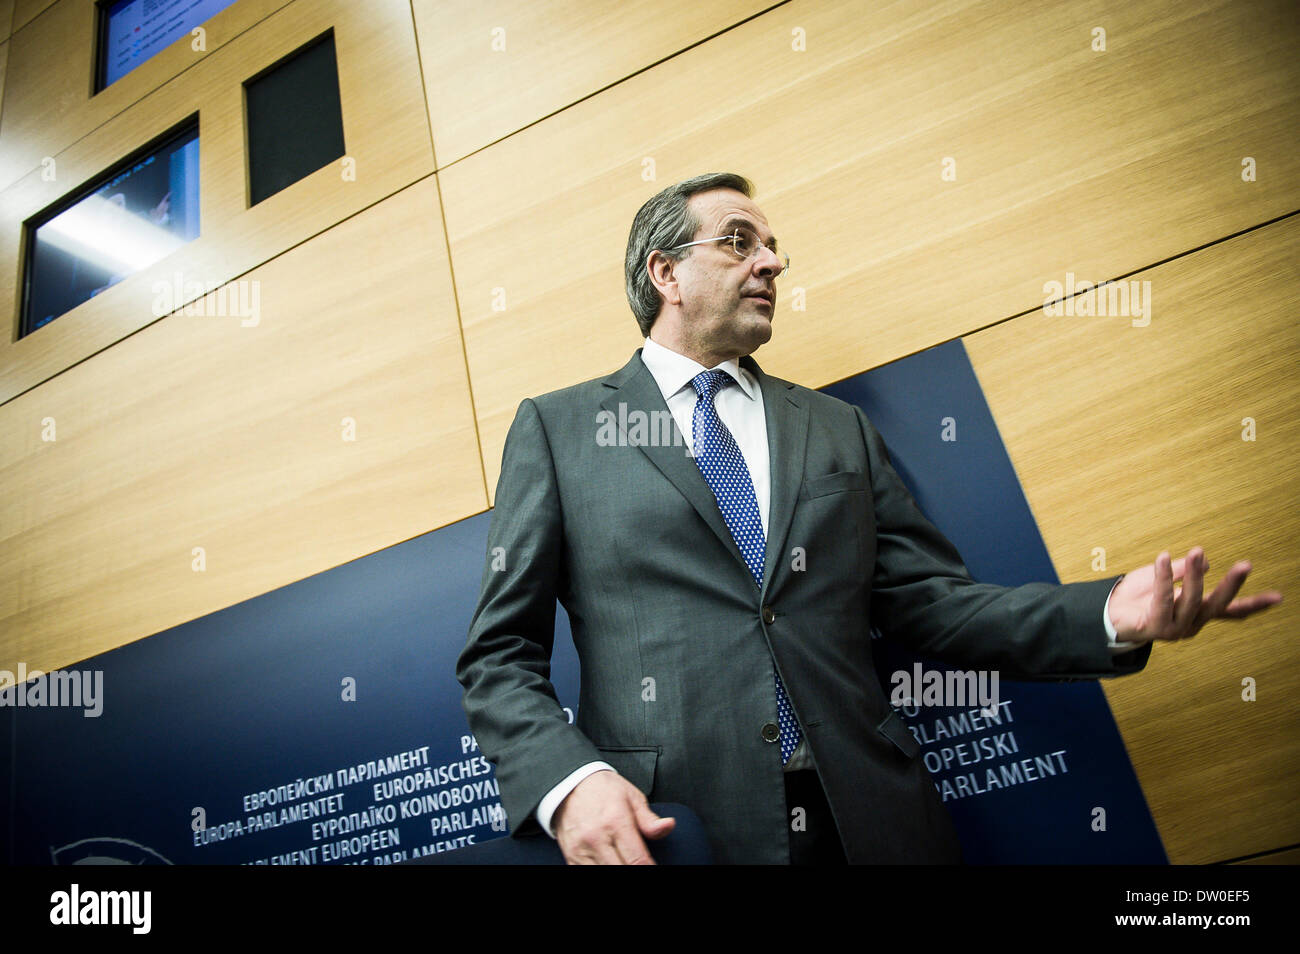 Antonis SAMARAS, Prime Minister of Greece leaves the press room after conference to announce the establishment of the High Level Group on Own Resources at European Parliament headquarters in Strasbourg, France on 25.02.2014 Stock Photo